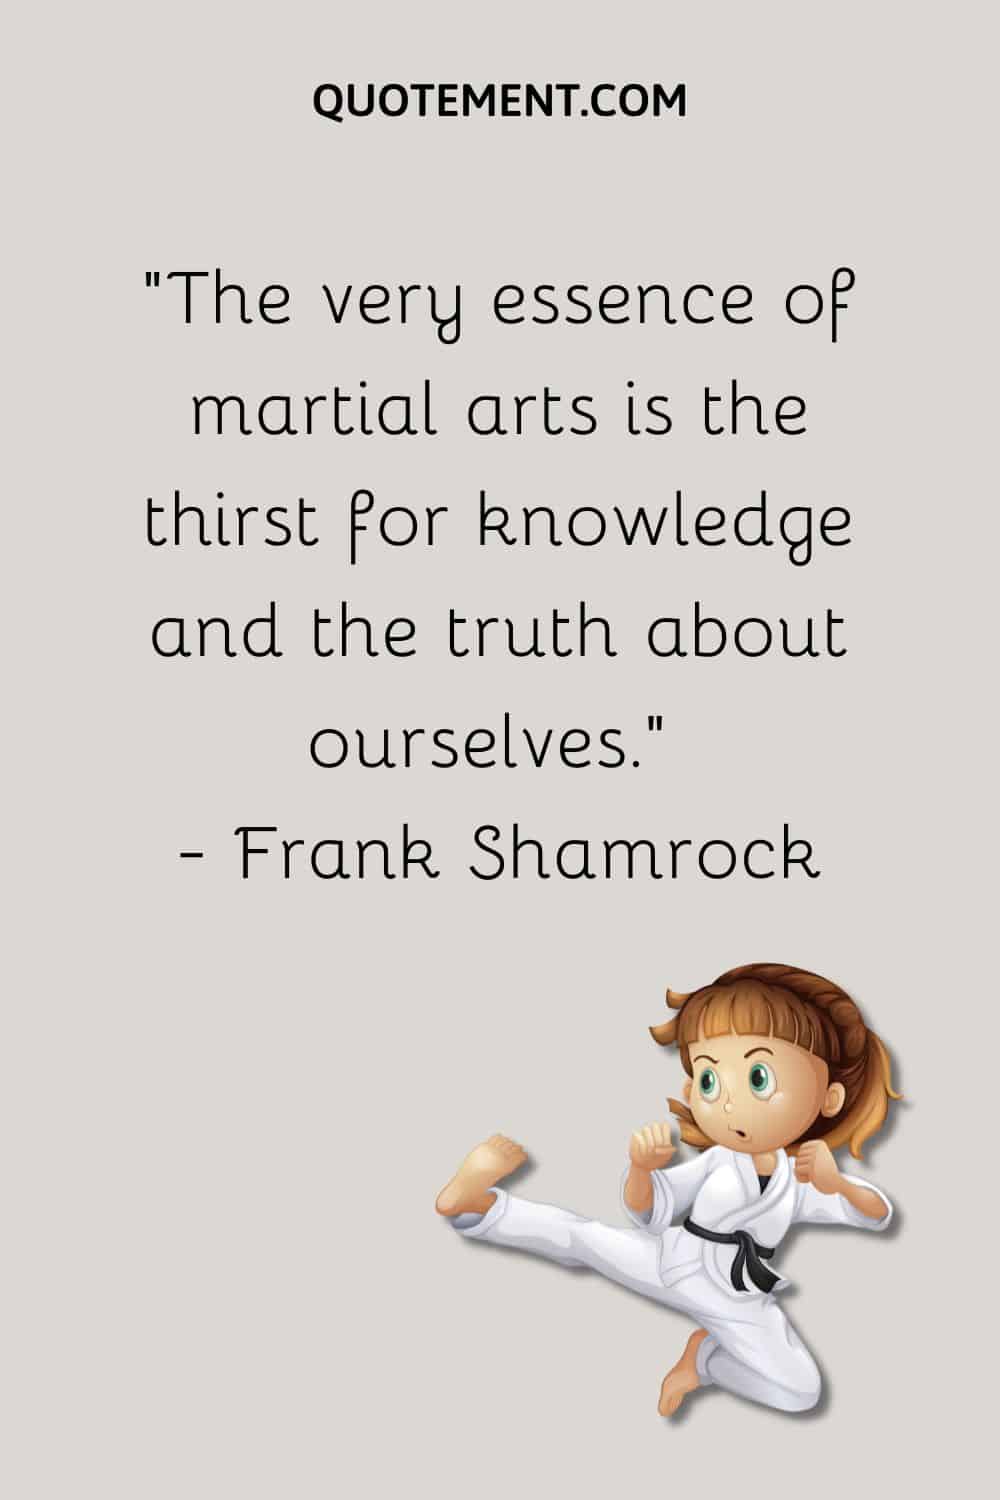 The very essence of martial arts is the thirst for knowledge and the truth about ourselves